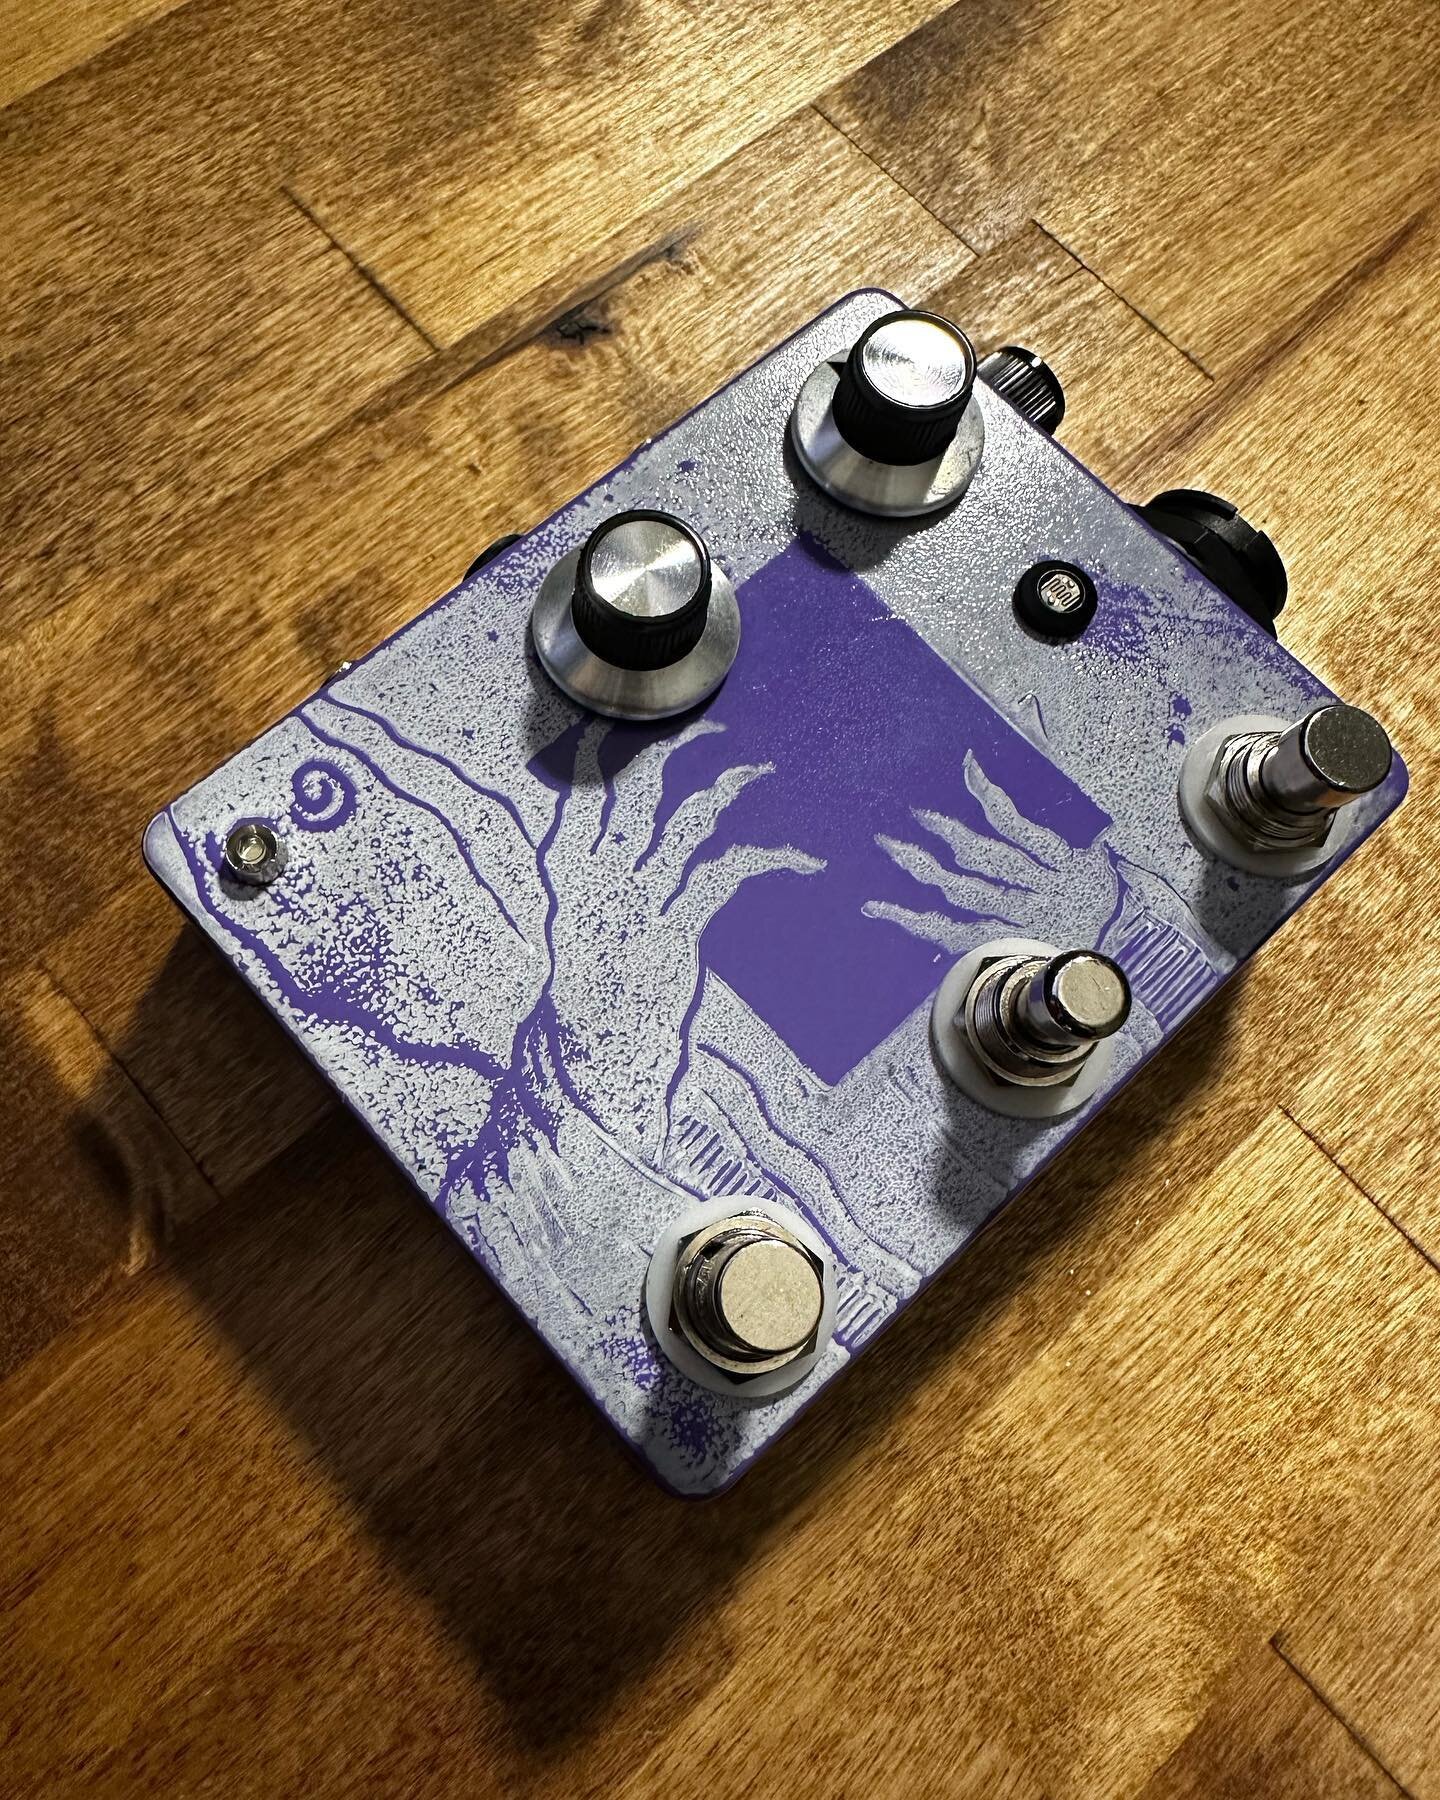 White Lino on Purps Drifter out the door, one more custom color Dream Eater on the way then I&rsquo;ll be all caught up. Grab any pedal with custom colors on the site for $50 + base pedal cost. I love doing it but i don&rsquo;t know how much longer I